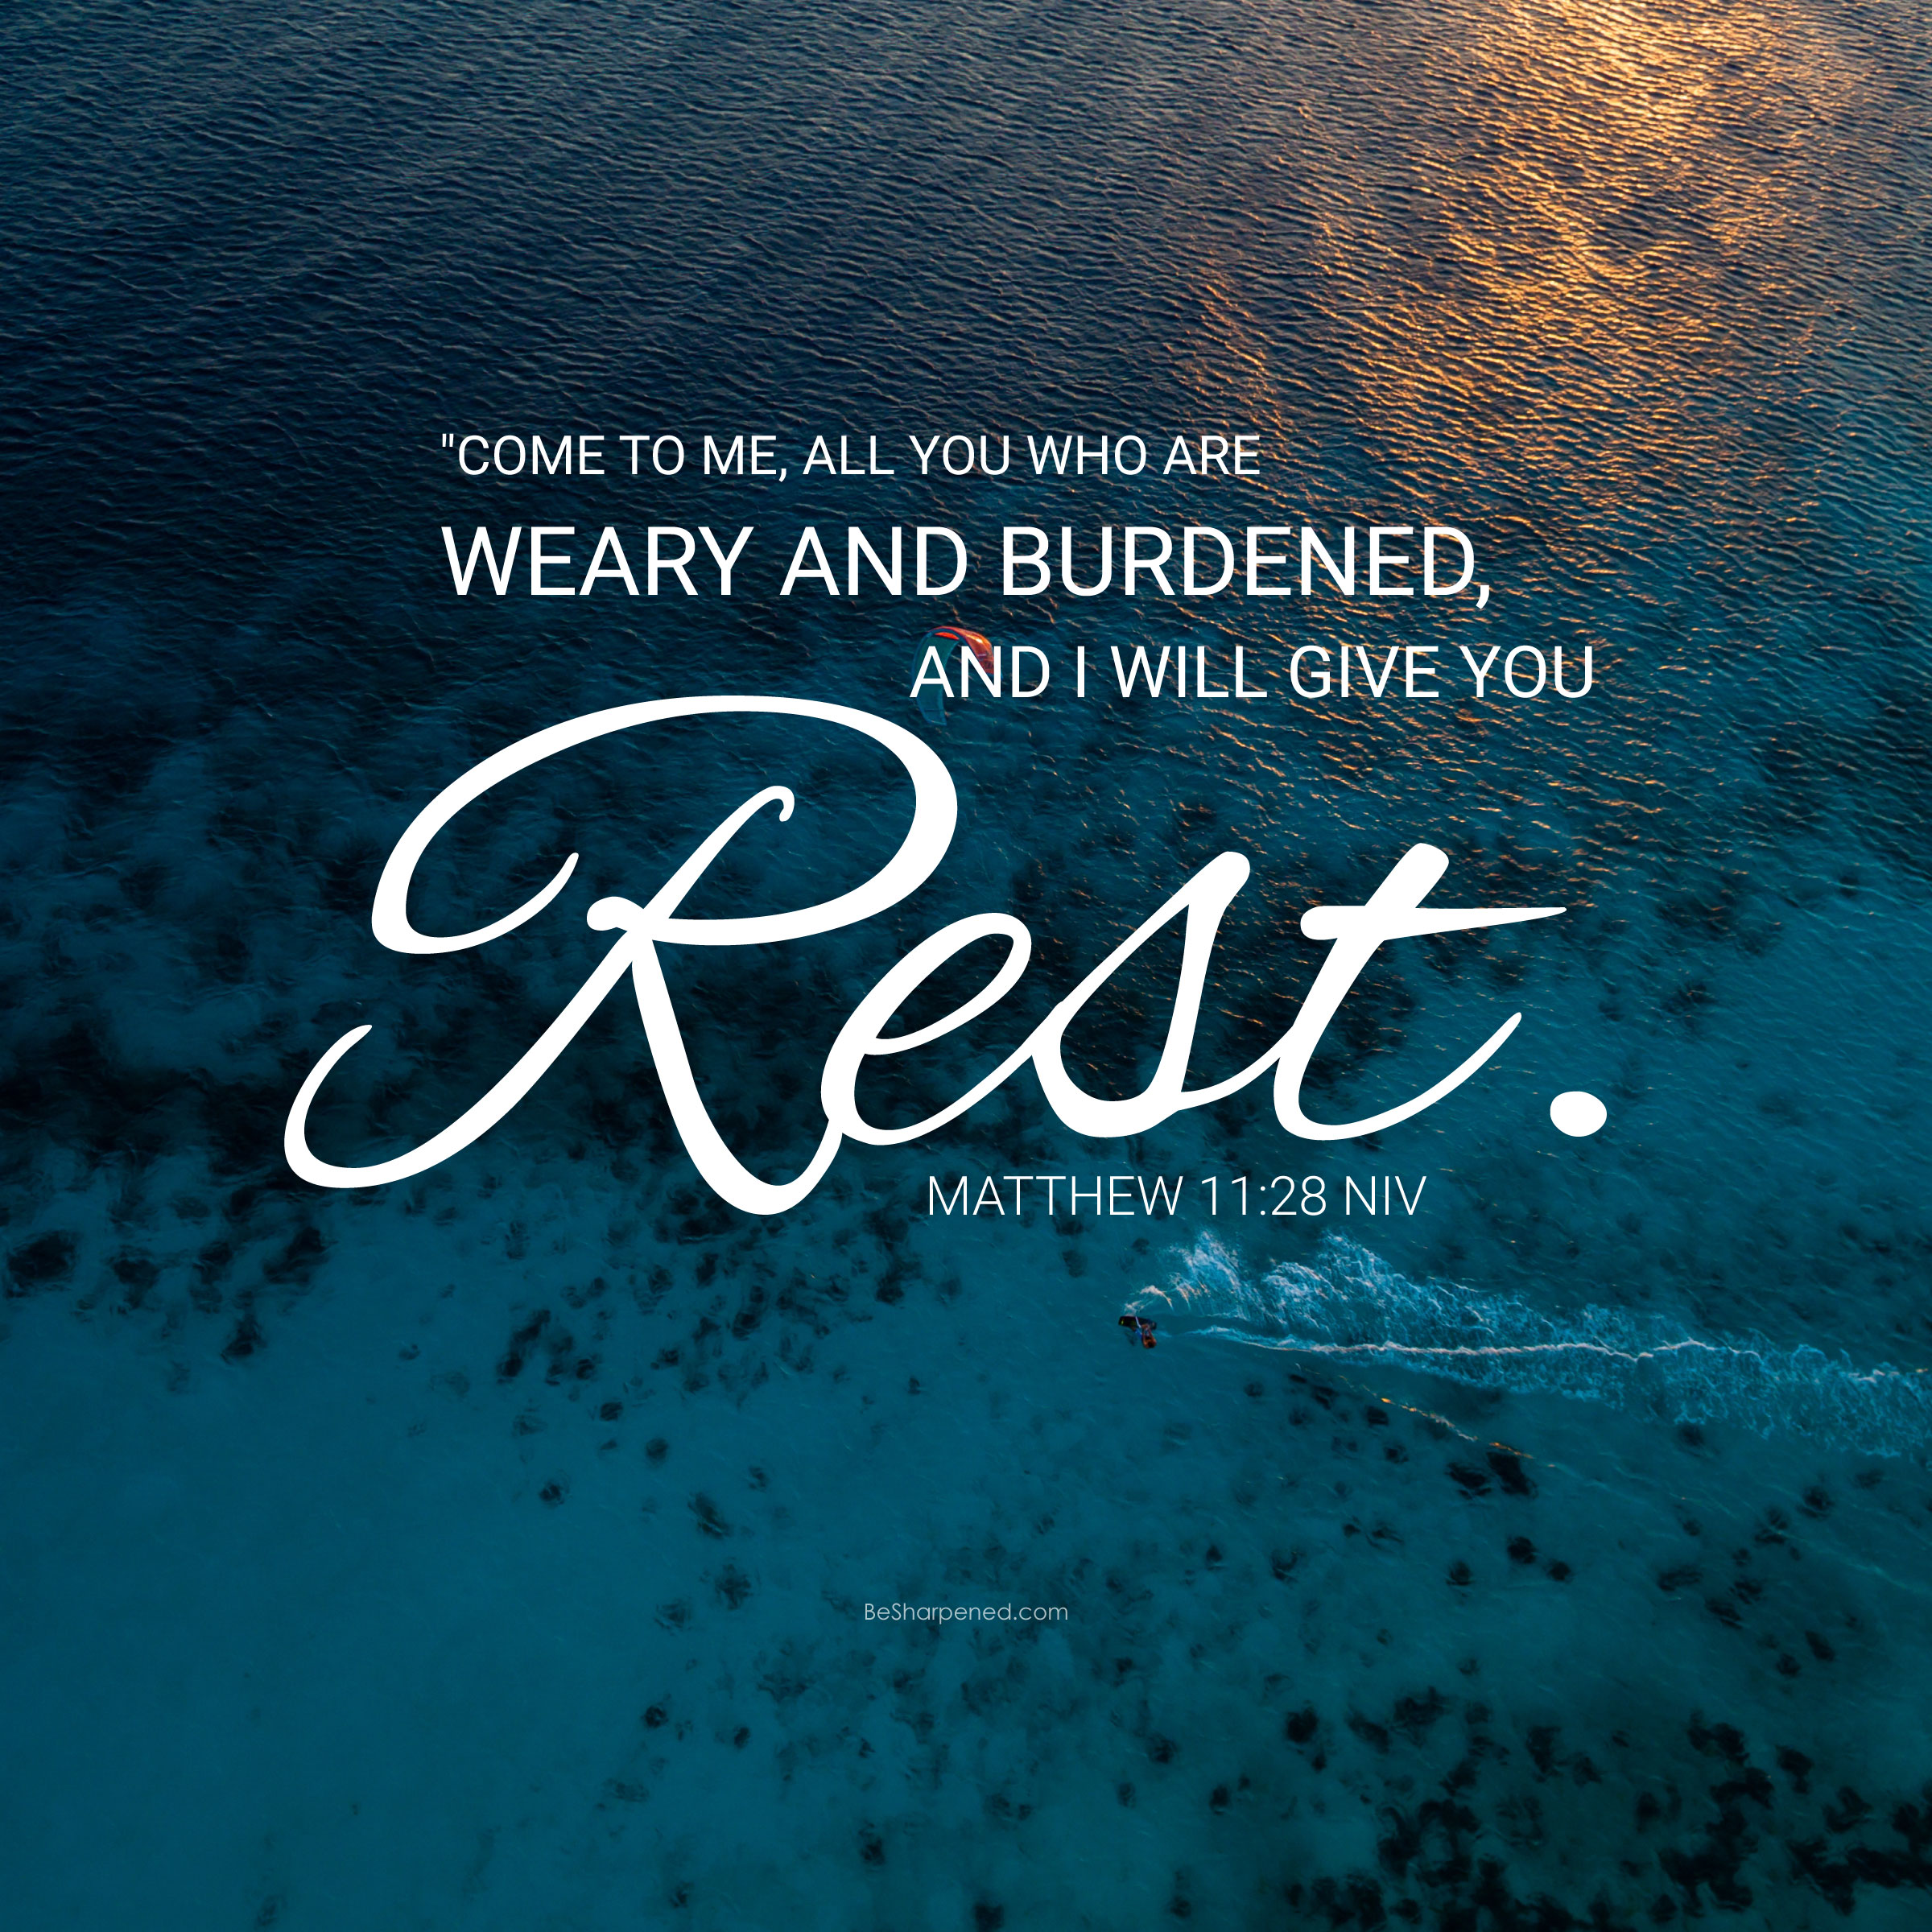 matthew 11:28 - rest for the weary and burdened